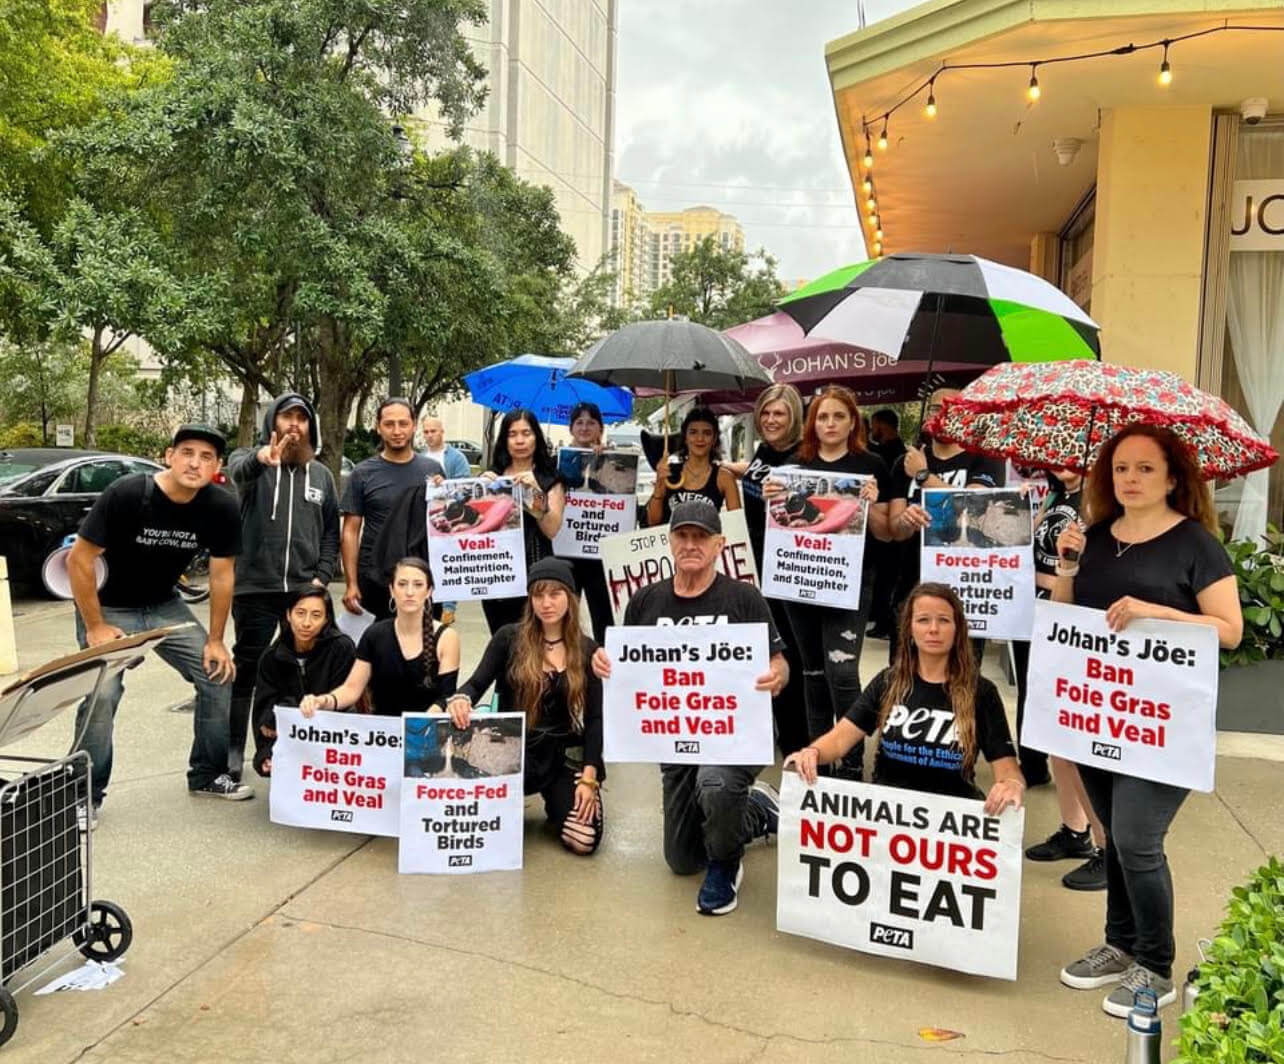 a crowd of protestors holding signs saying "Johan Joe: Ban Foie Gras and Veal" and other animal rights slogans posing in front of the restaurant on a sidewalk